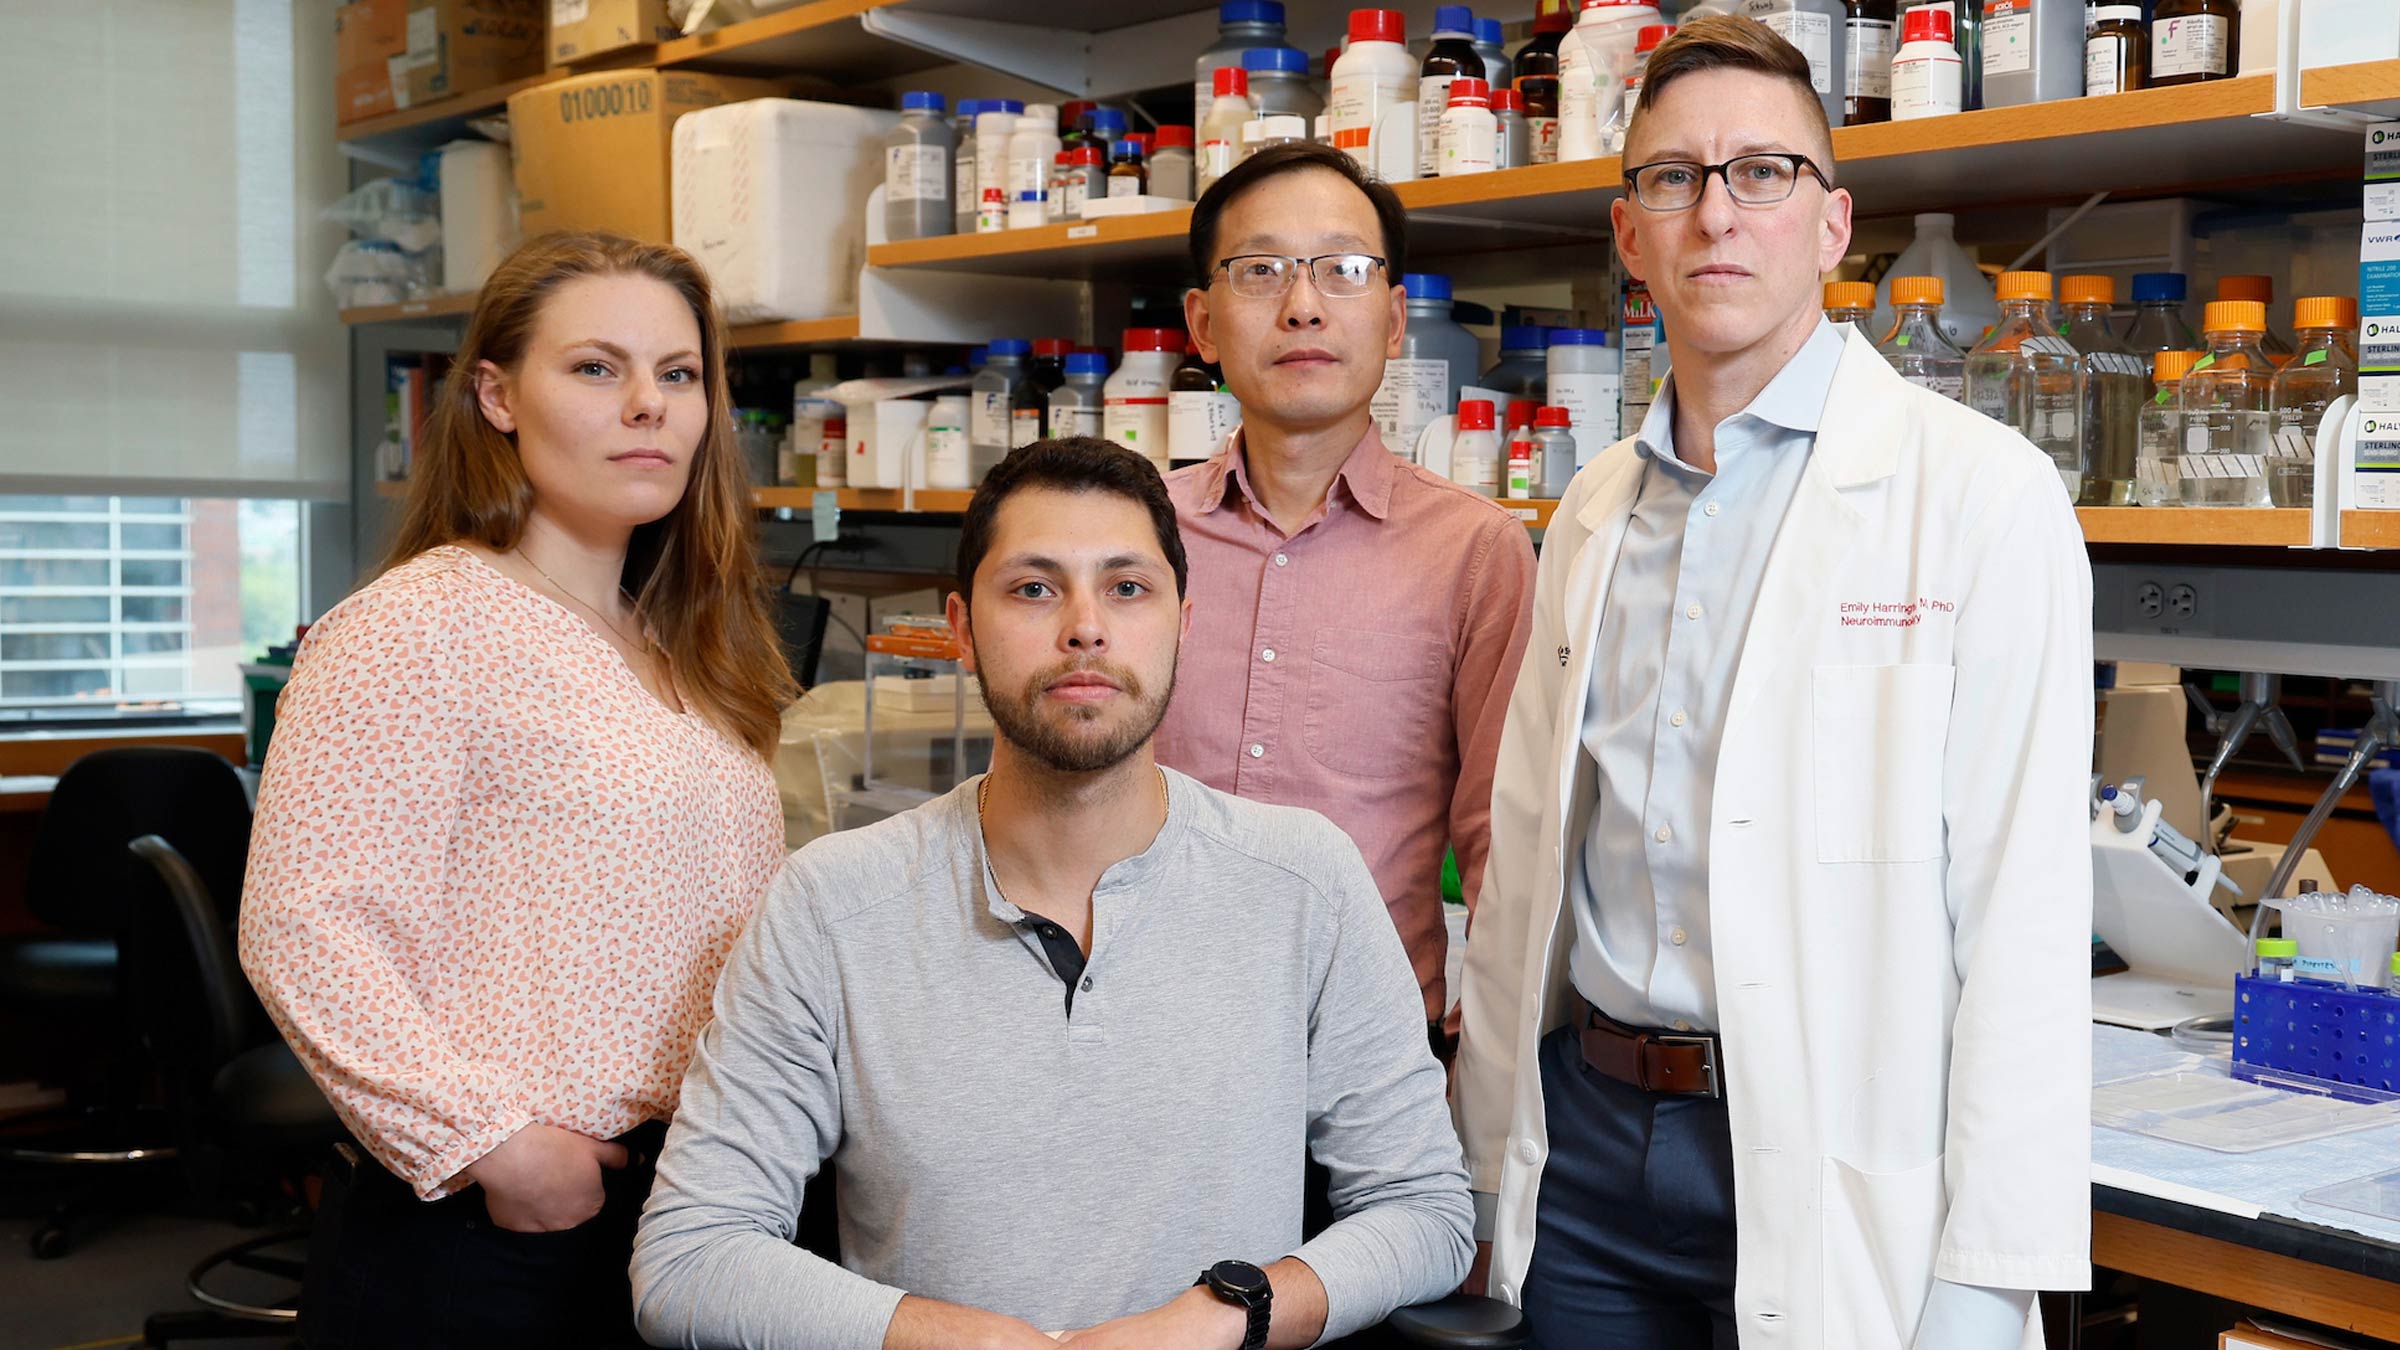 Stephen Vidman, neuroscience graduate student and stroke patient, with his colleagues from the Neuroscience and Neurology departments